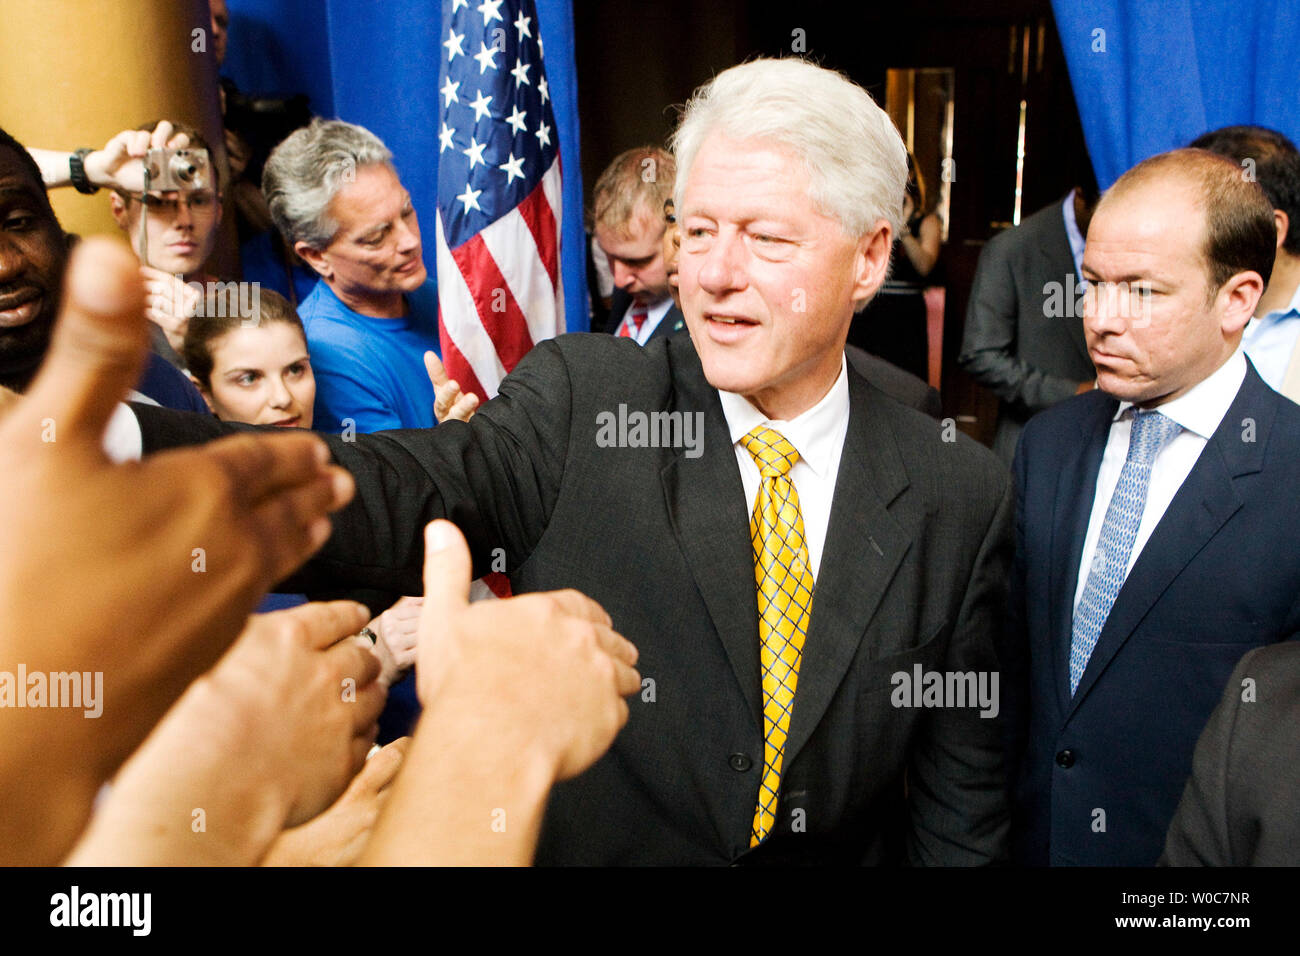 Former President Bill Clinton signs autographs after a campaign event at the National Building Museum in Washington on June 7, 2008. Clinton formally suspended her campaign for president and endorsed Democratic Presidential candidate Sen. Barack Obama, D-IL. (UPI Photo/Patrick D. McDermott) Stock Photo